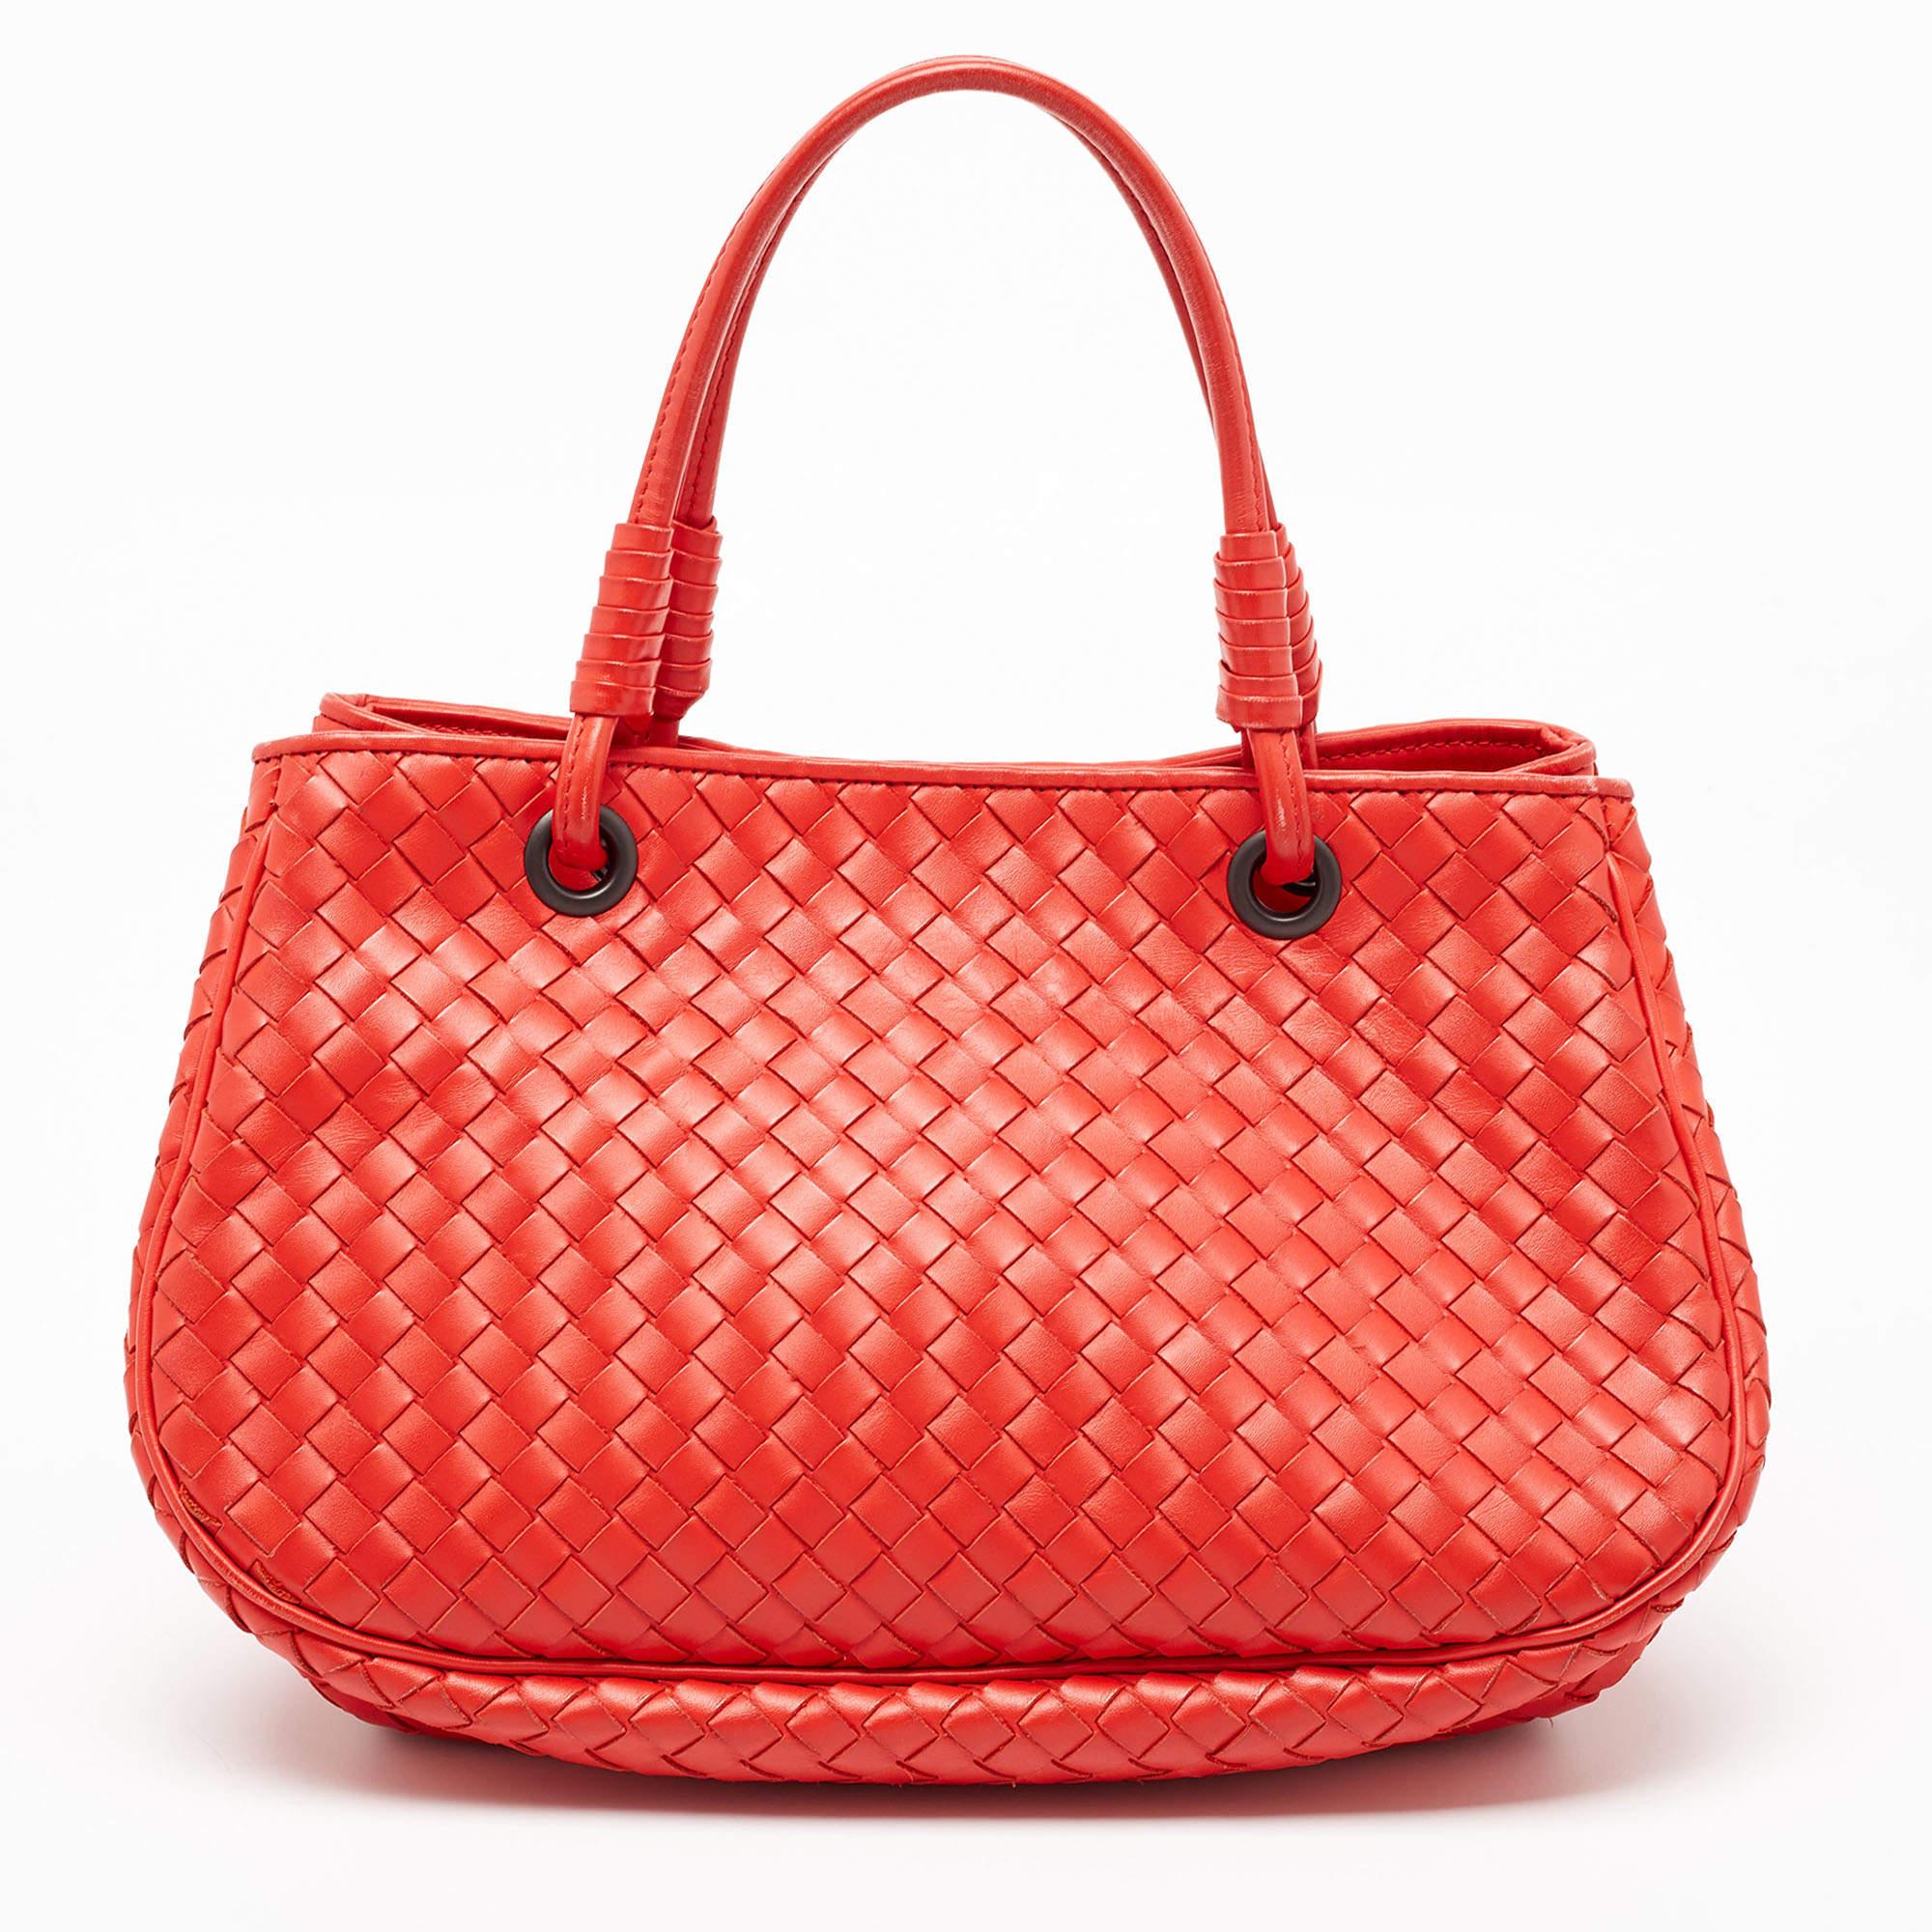 Indulge in timeless luxury with this Bottega Veneta bag for women. Meticulously crafted, this exquisite accessory embodies elegance, functionality, and style, making it the ultimate companion for every sophisticated woman.

